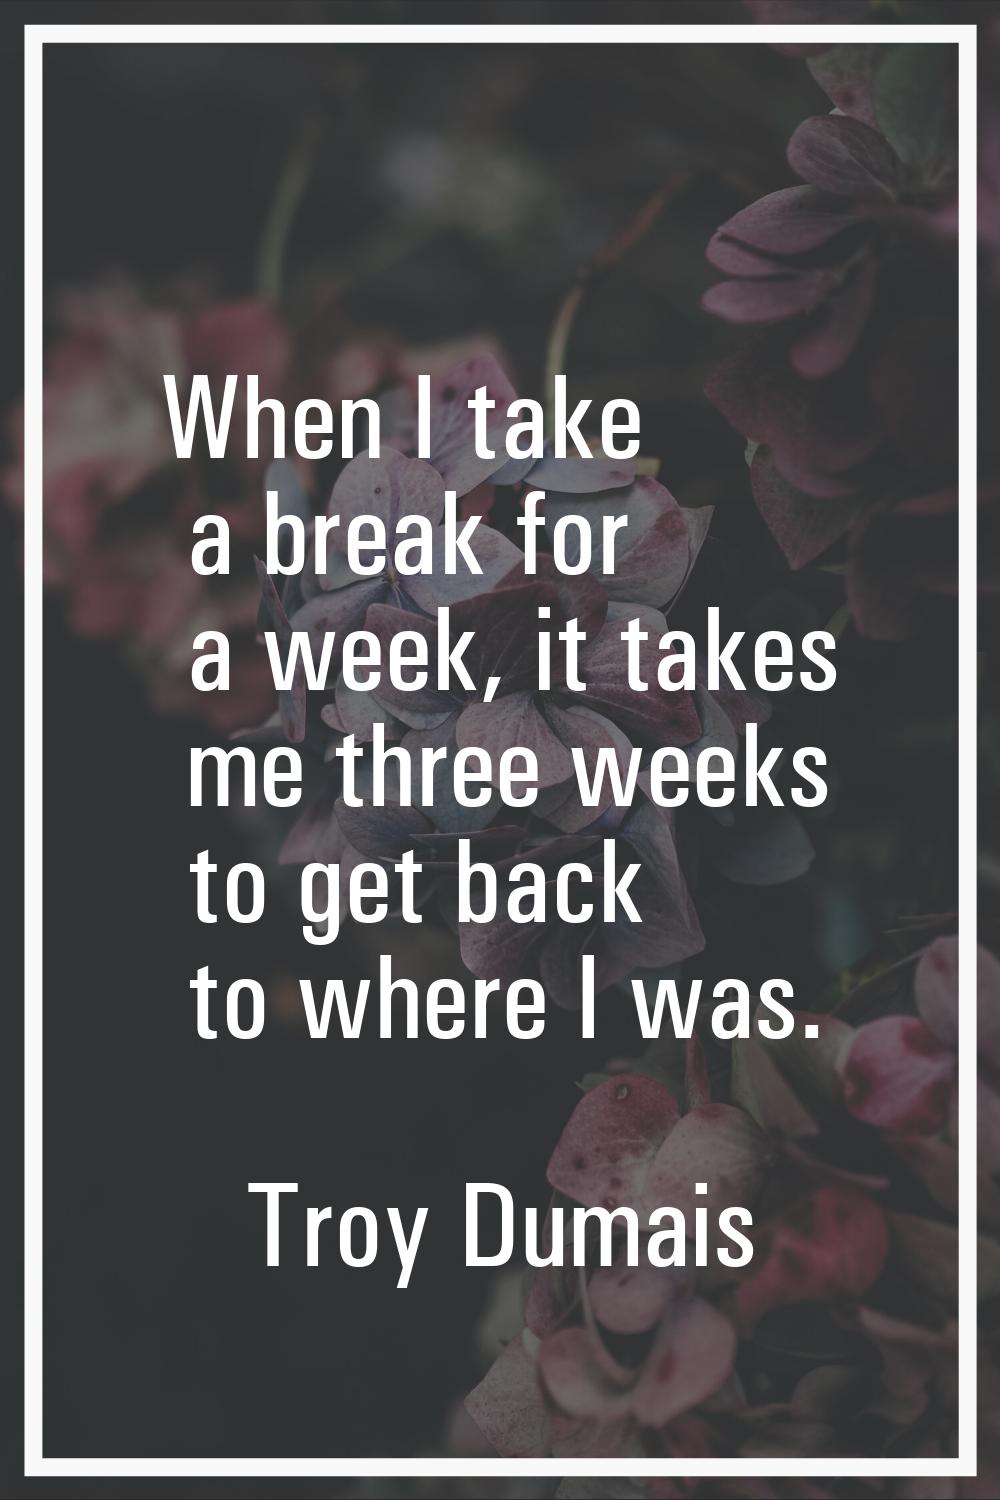 When I take a break for a week, it takes me three weeks to get back to where I was.